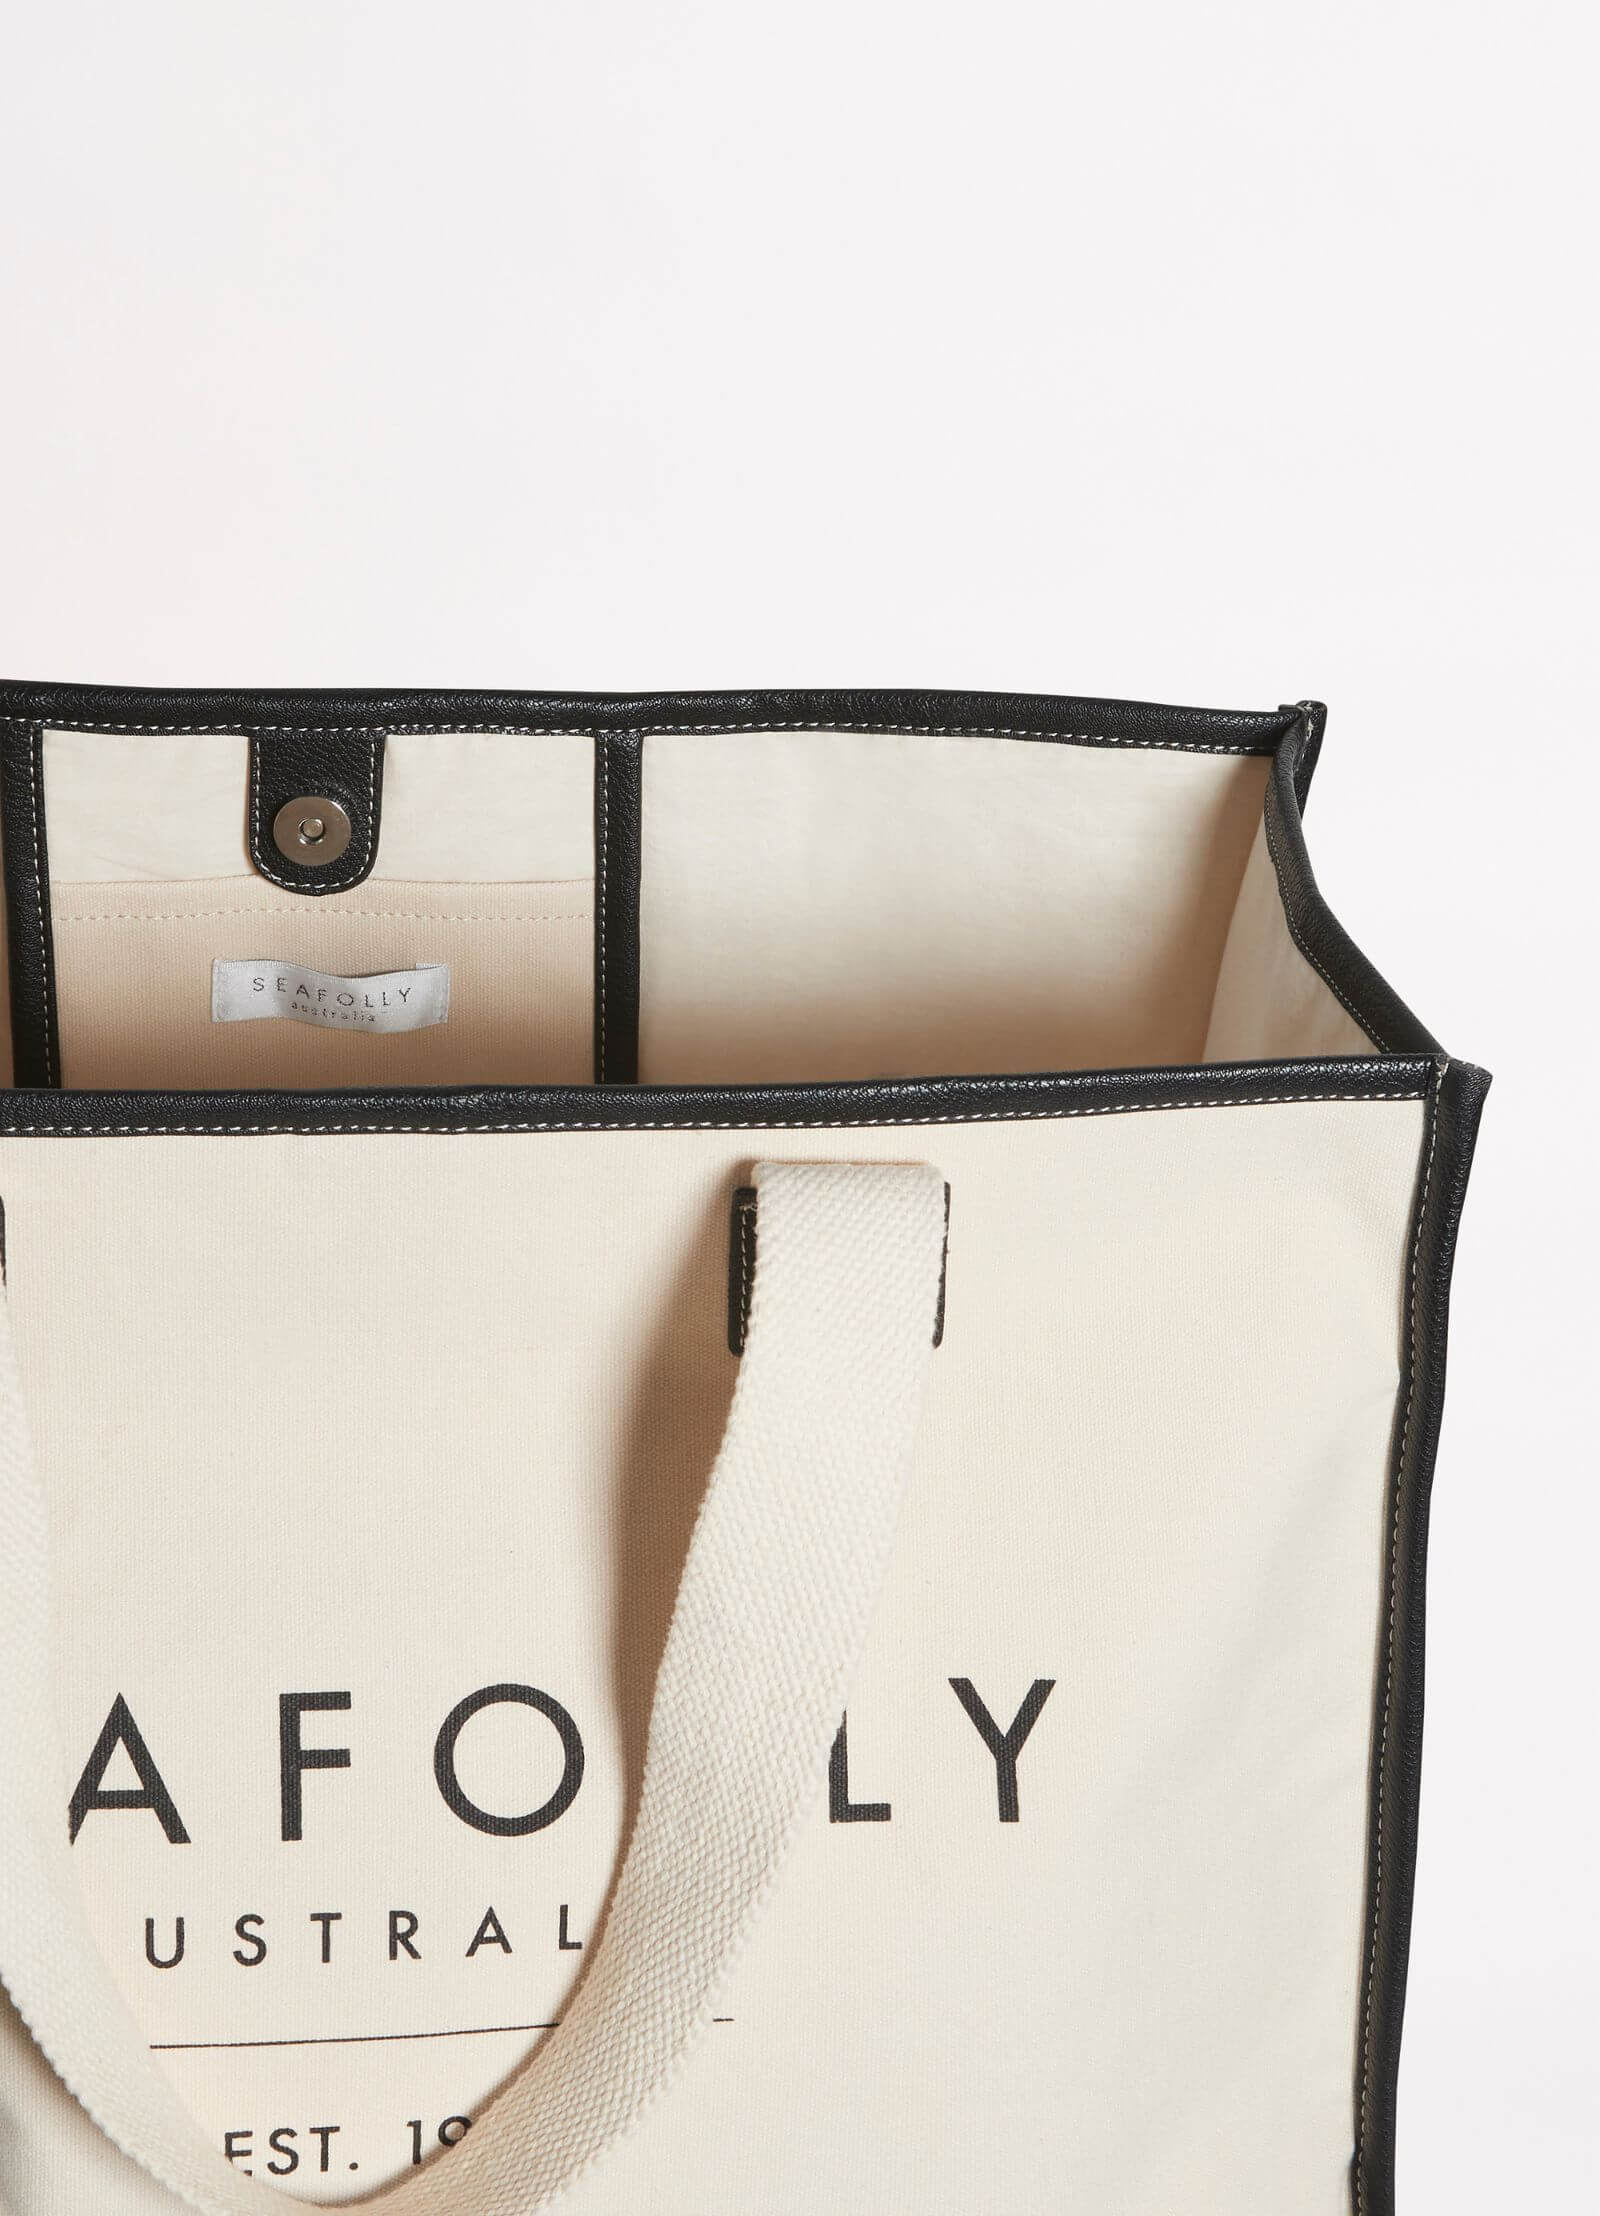 SEAFOLLY CARRIED AWAY SHORES WOVEN TOTE BAG | Ozzie Cozzie Co